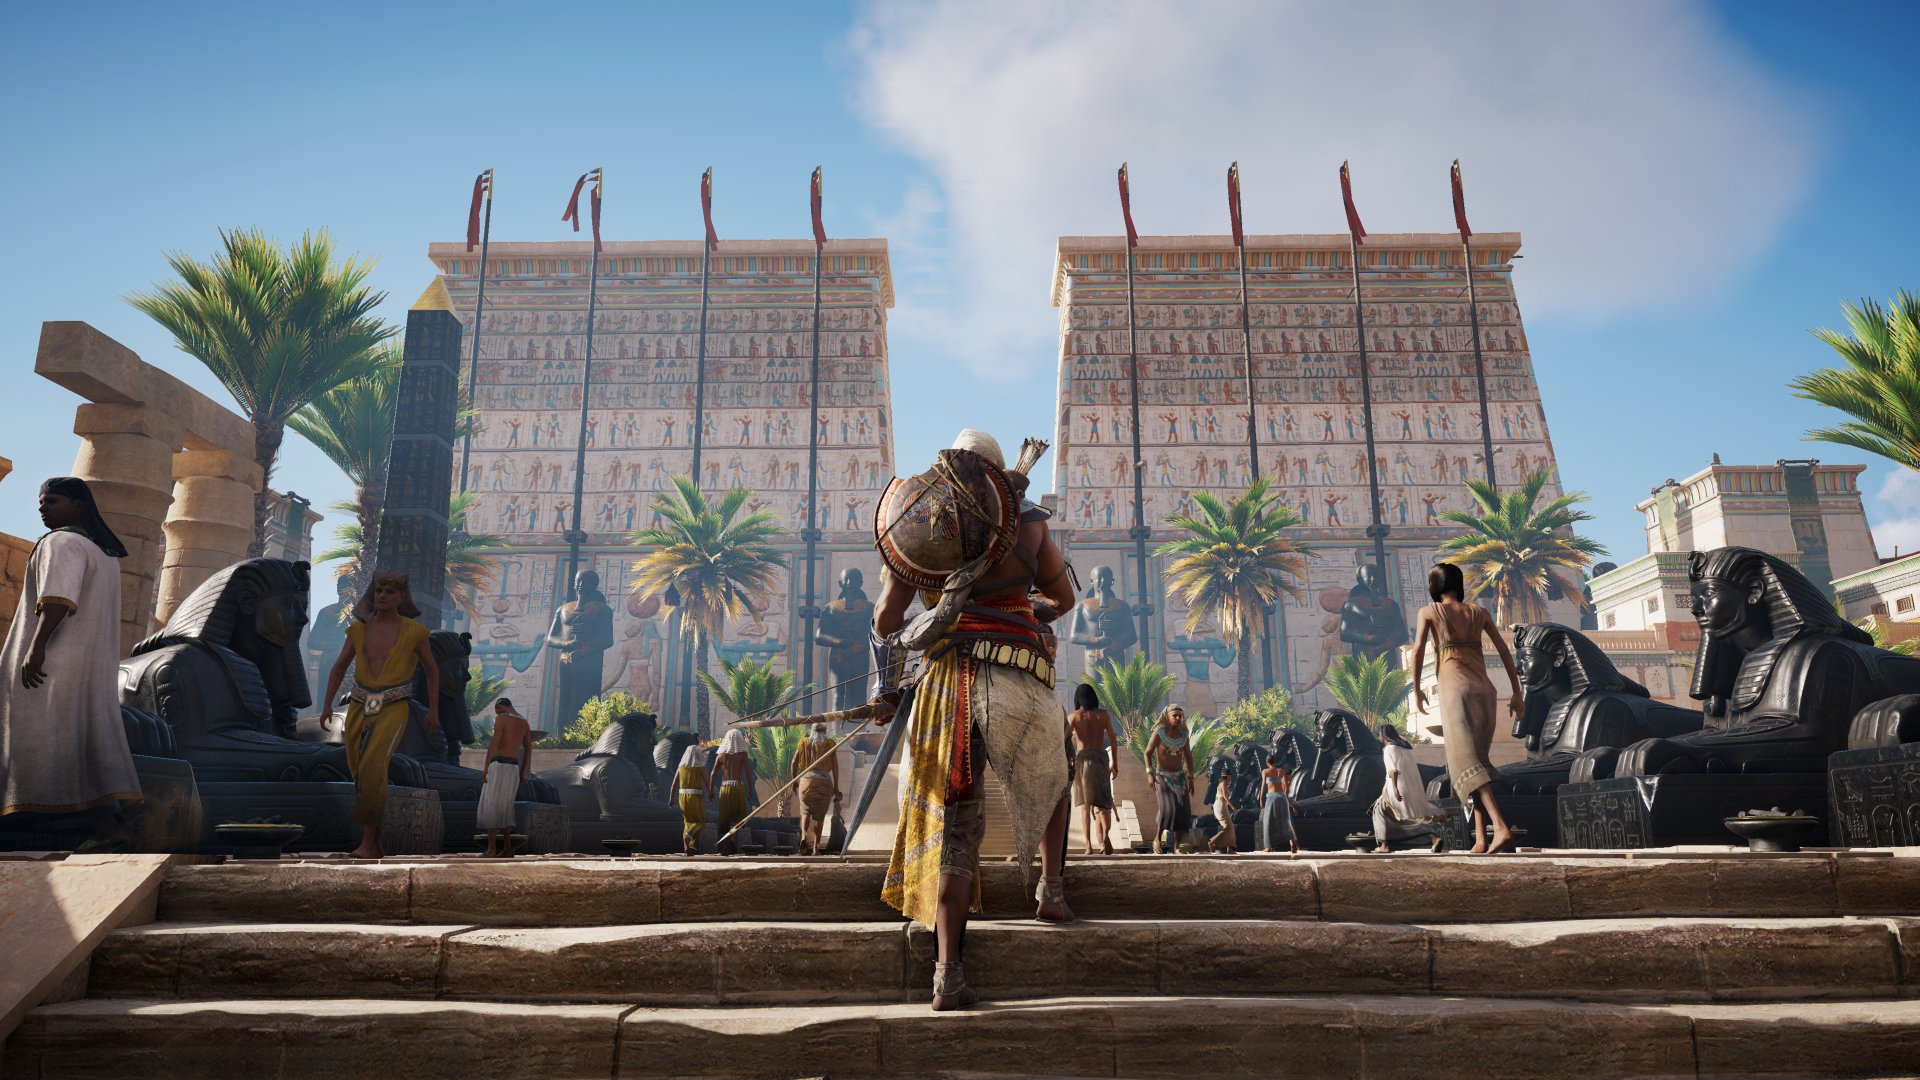 Assassin's Creed Origins Adds Free Update And Premium DLC This Month -  GameSpot